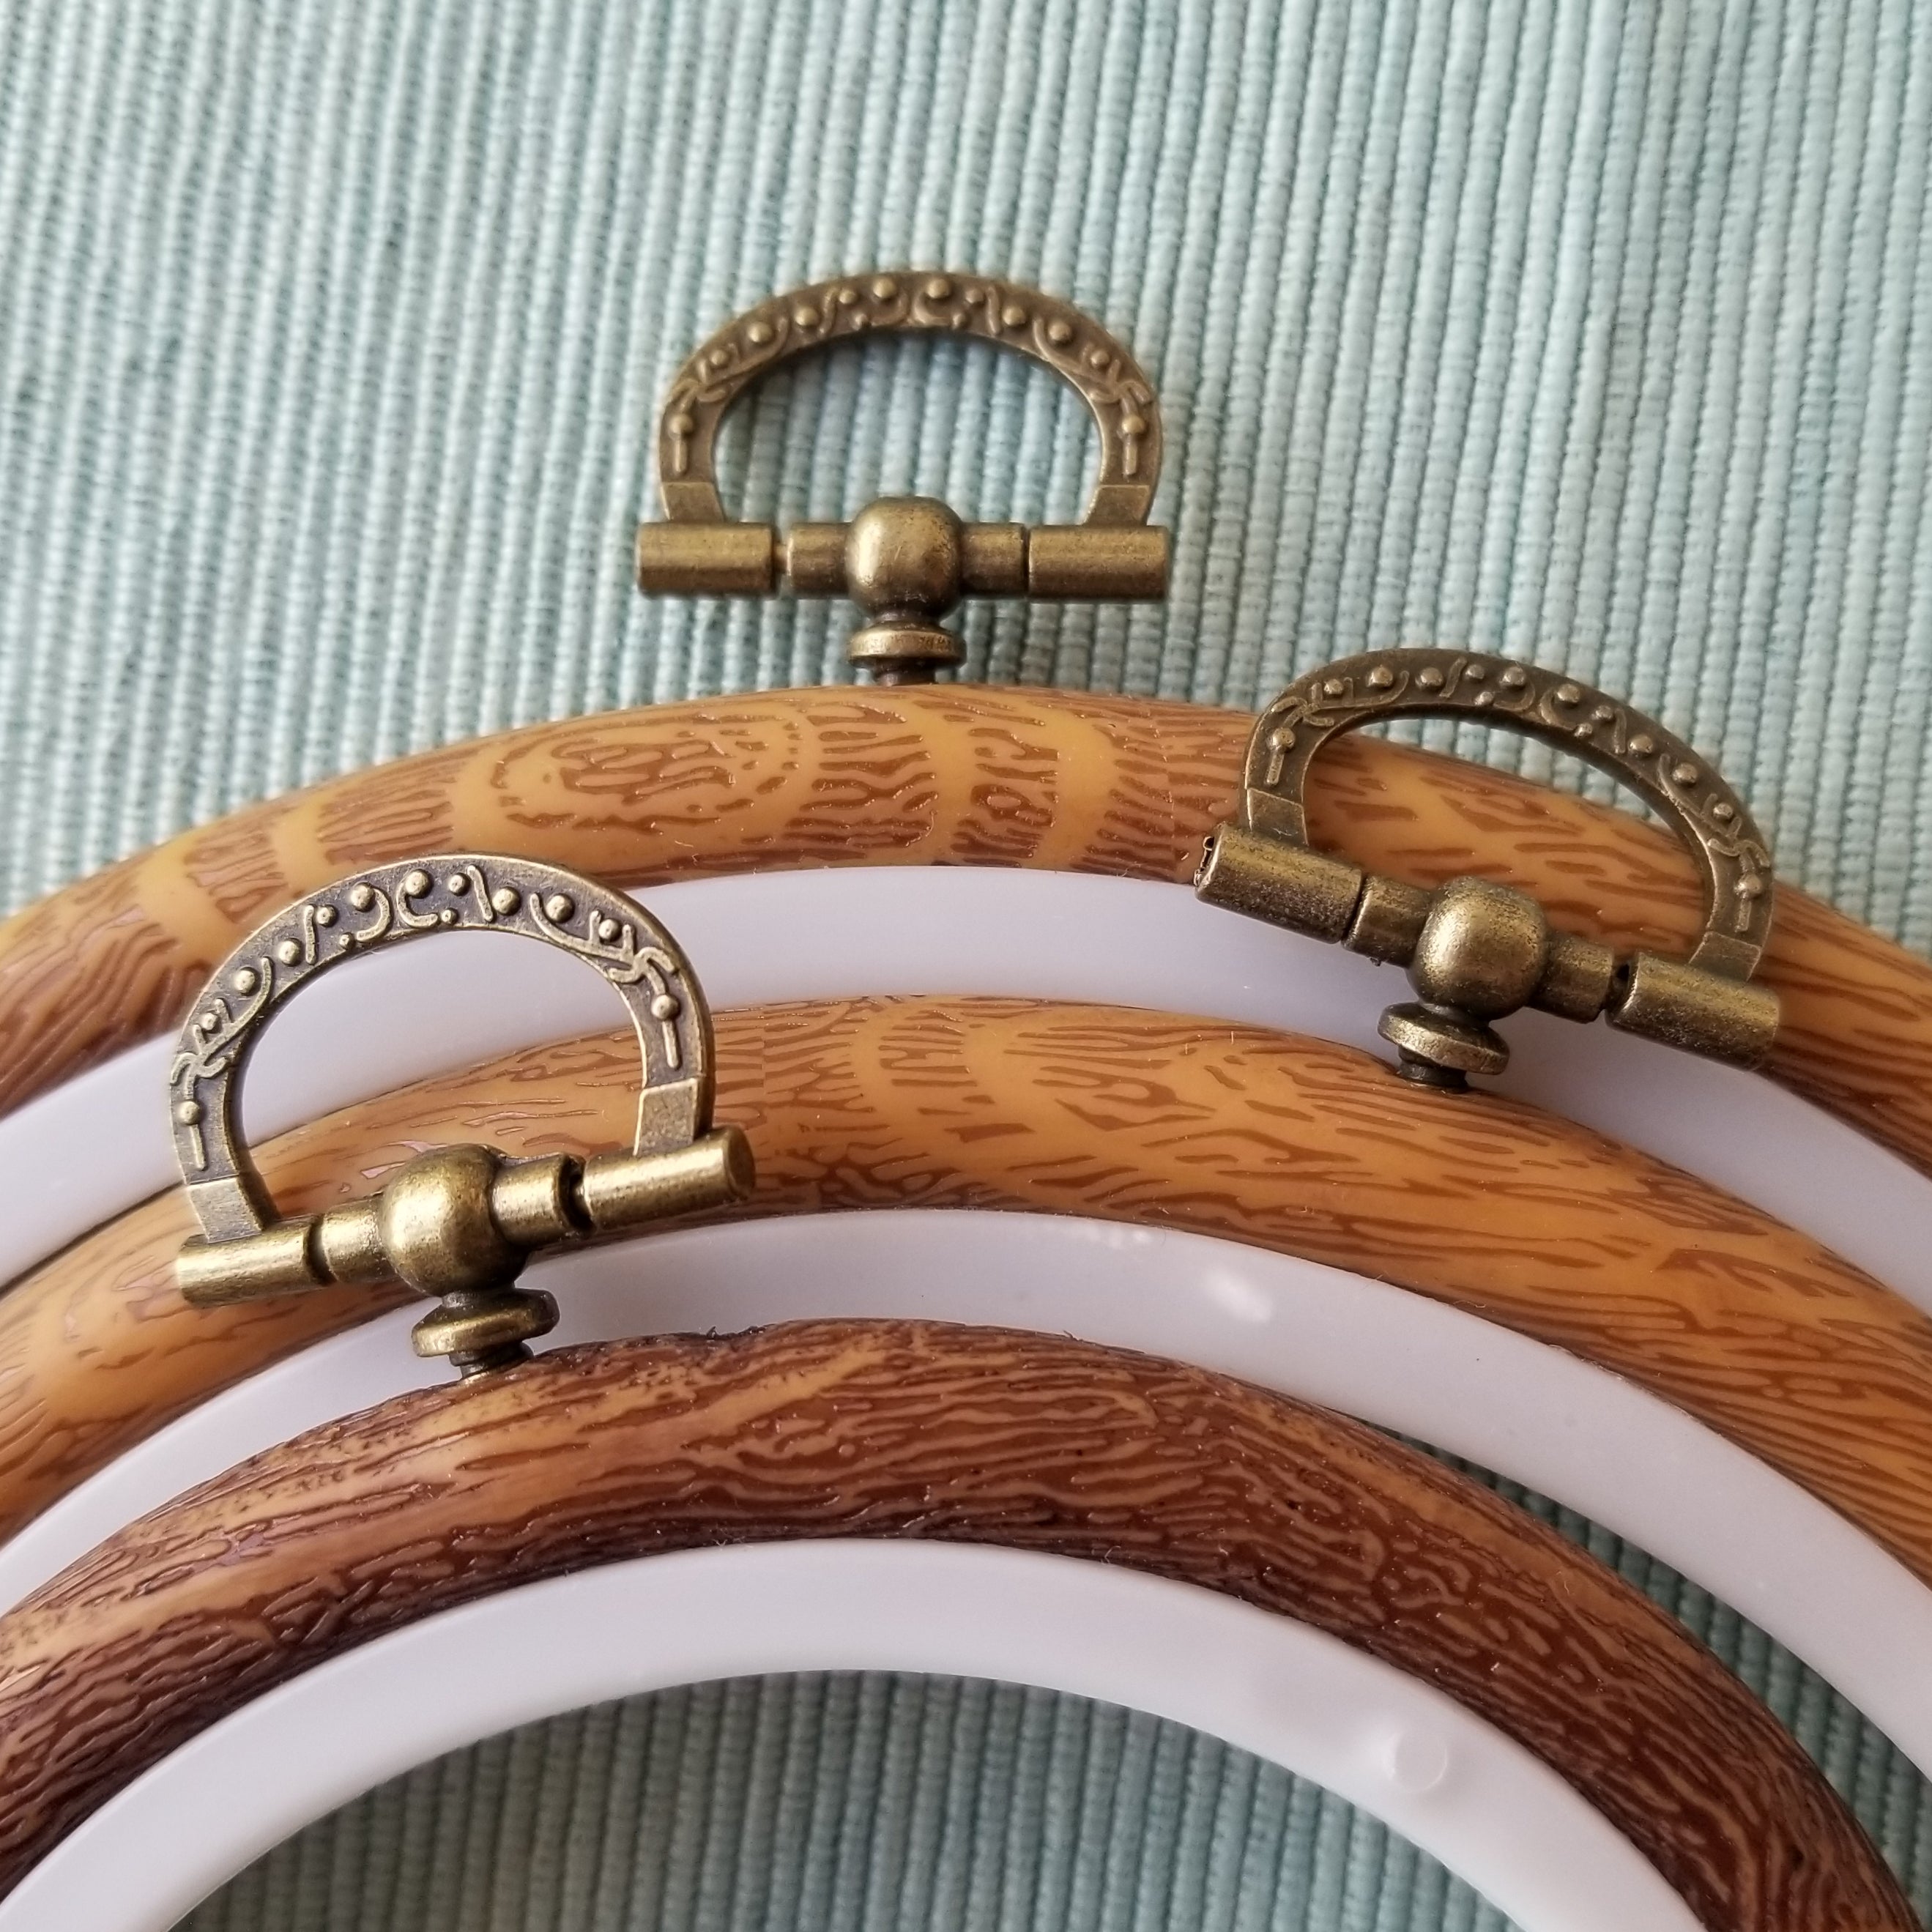 Faux Wood Embroidery Hoops – Jessica Long Embroidery